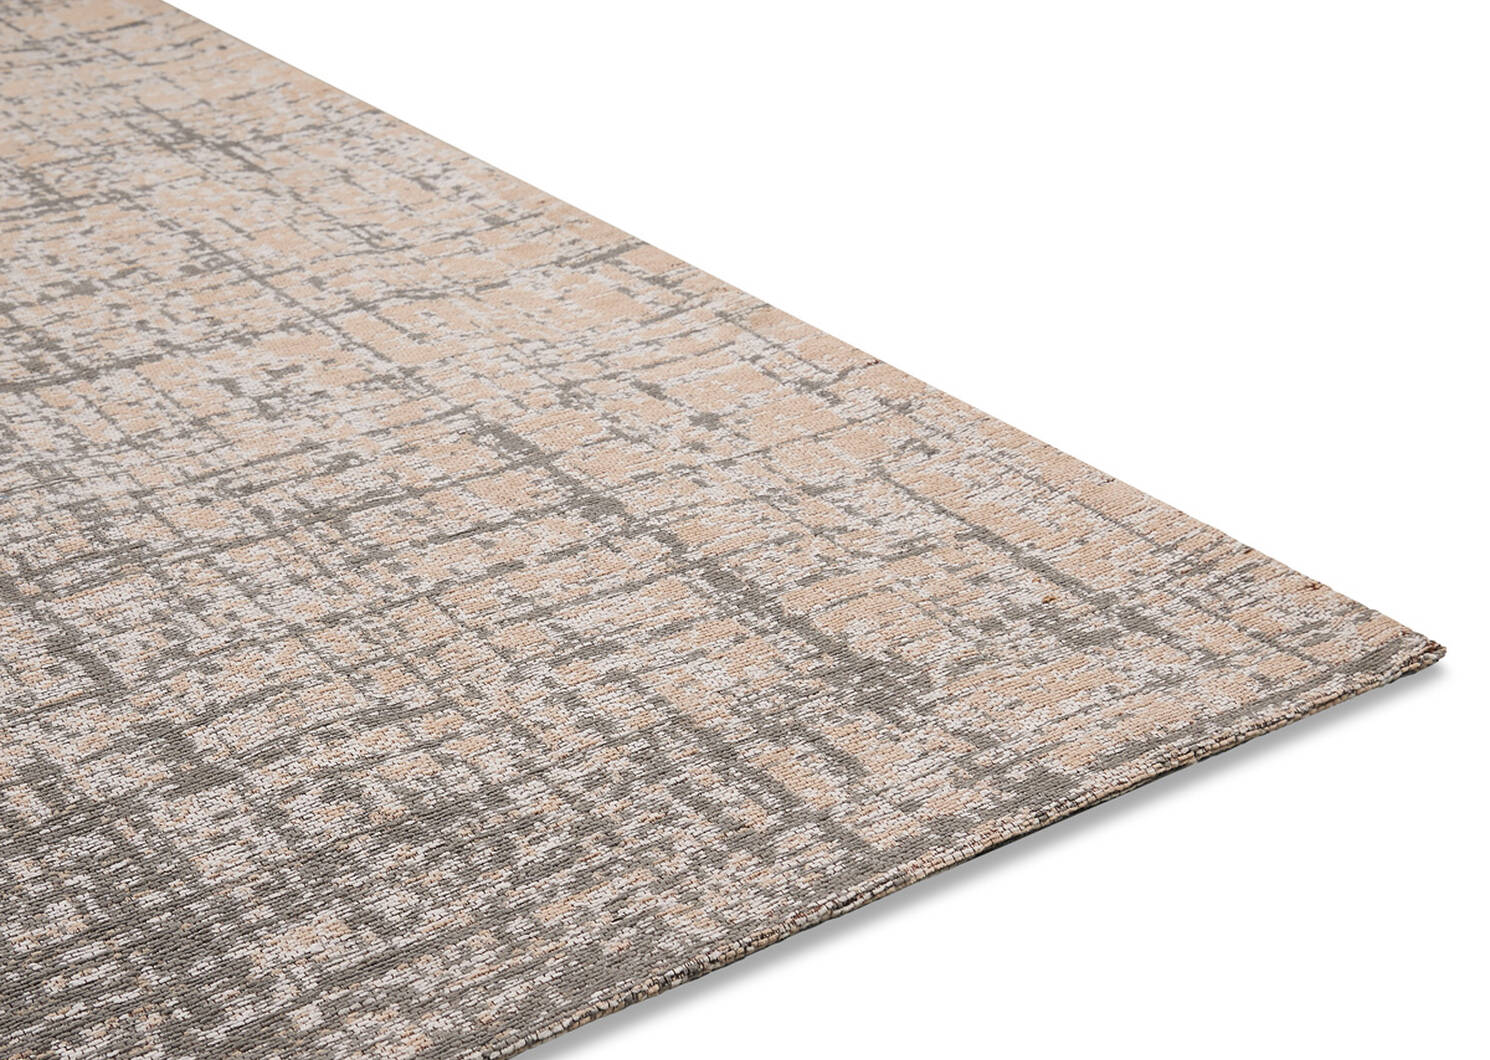 Chastain Rug 96x135 Ivory/Sand